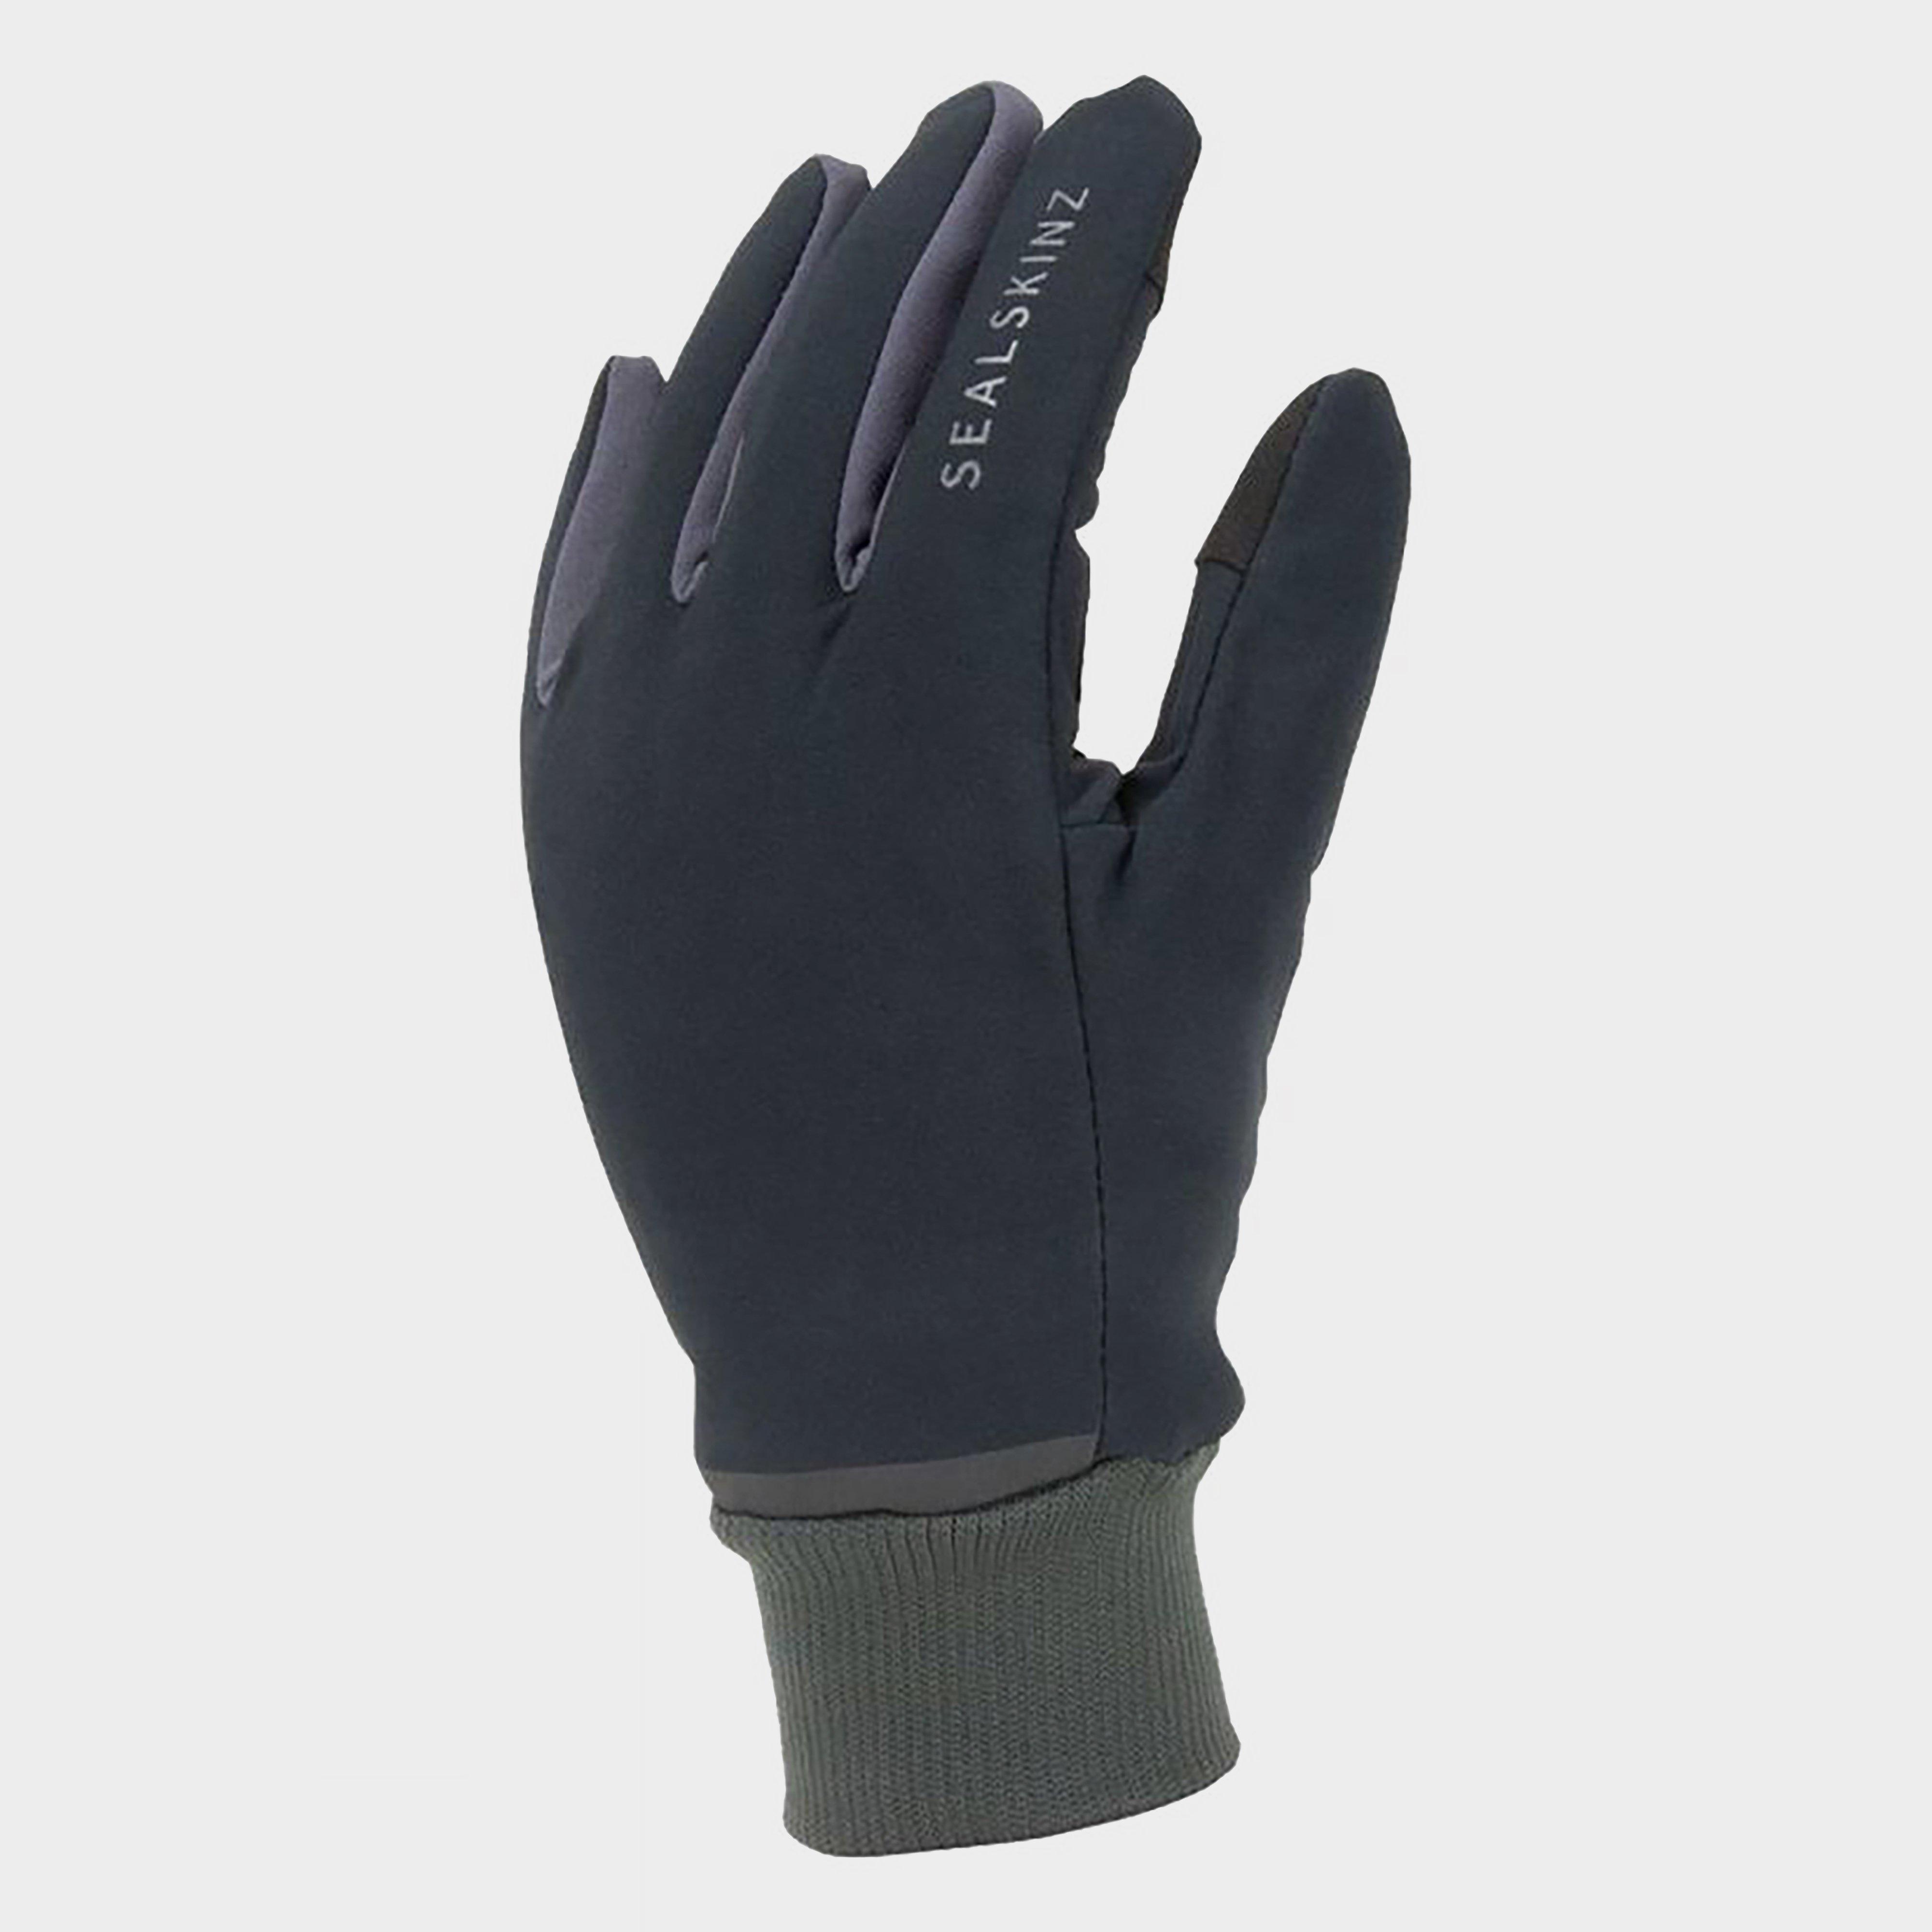  Sealskinz Waterproof All Weather Lightweight Glove with Fusion Control, Black